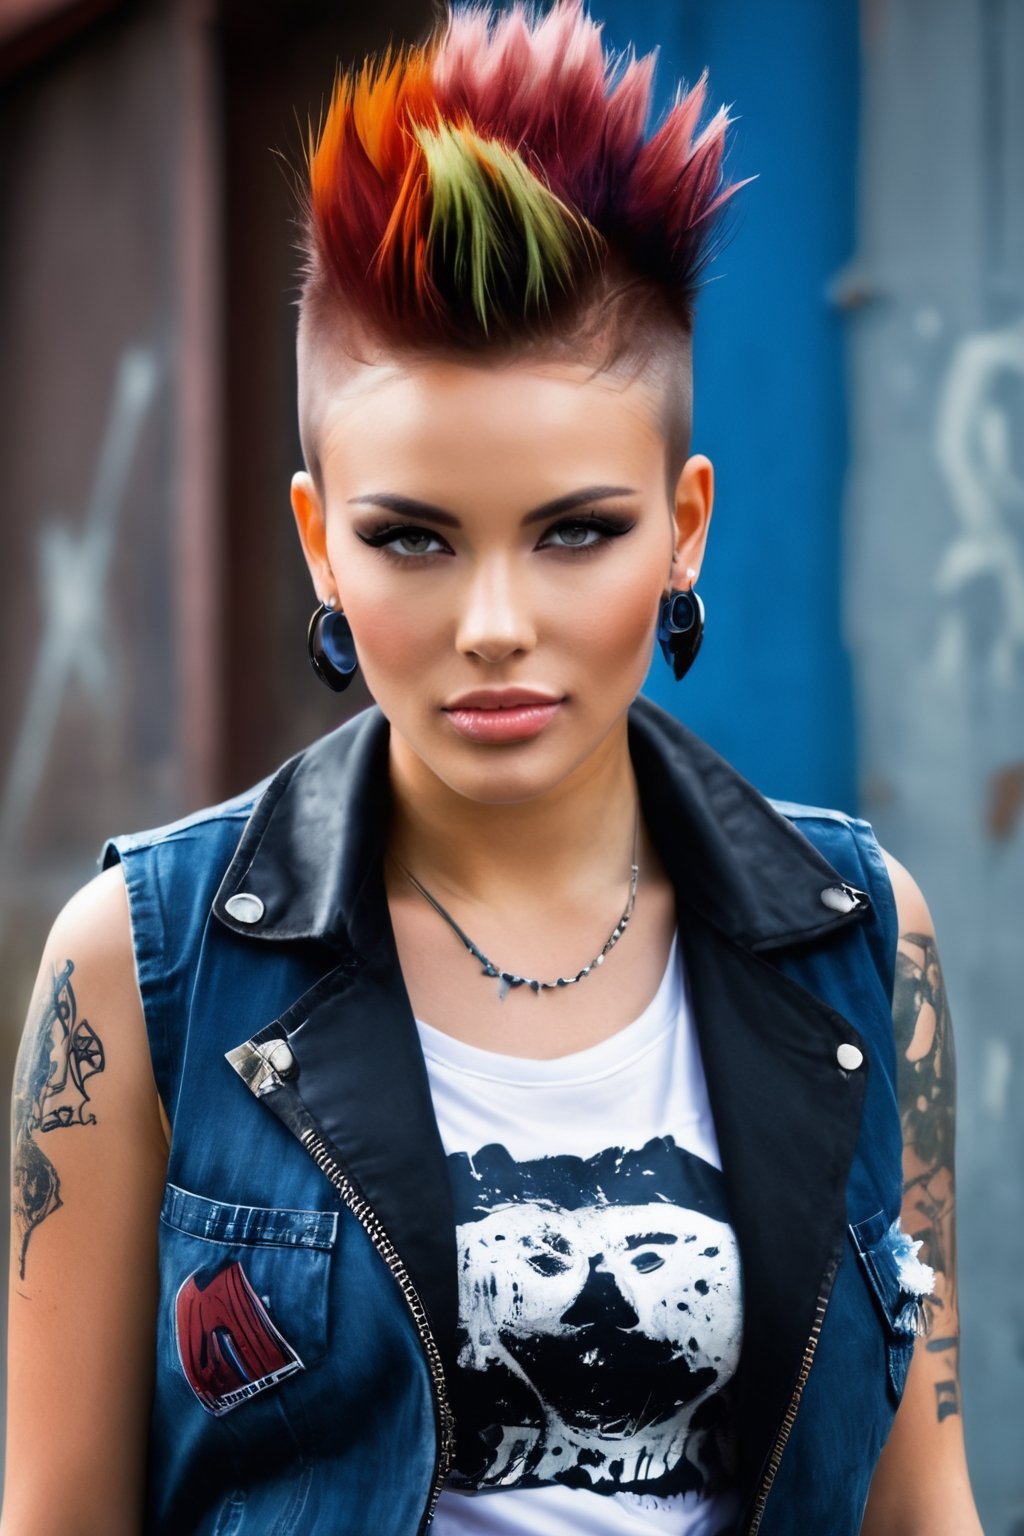 Creates a very high quality image, extreme details of realism, ultra definition, 16k UHD, beautiful girl, hair shaved on the sides and red mohawk in the center, beautiful brown eyes, piercing on the face, dirty t-shirt punk band logo, vest Dirty and worn jeans, dirty and worn jeans, military boots, spray can in hand, angry expression